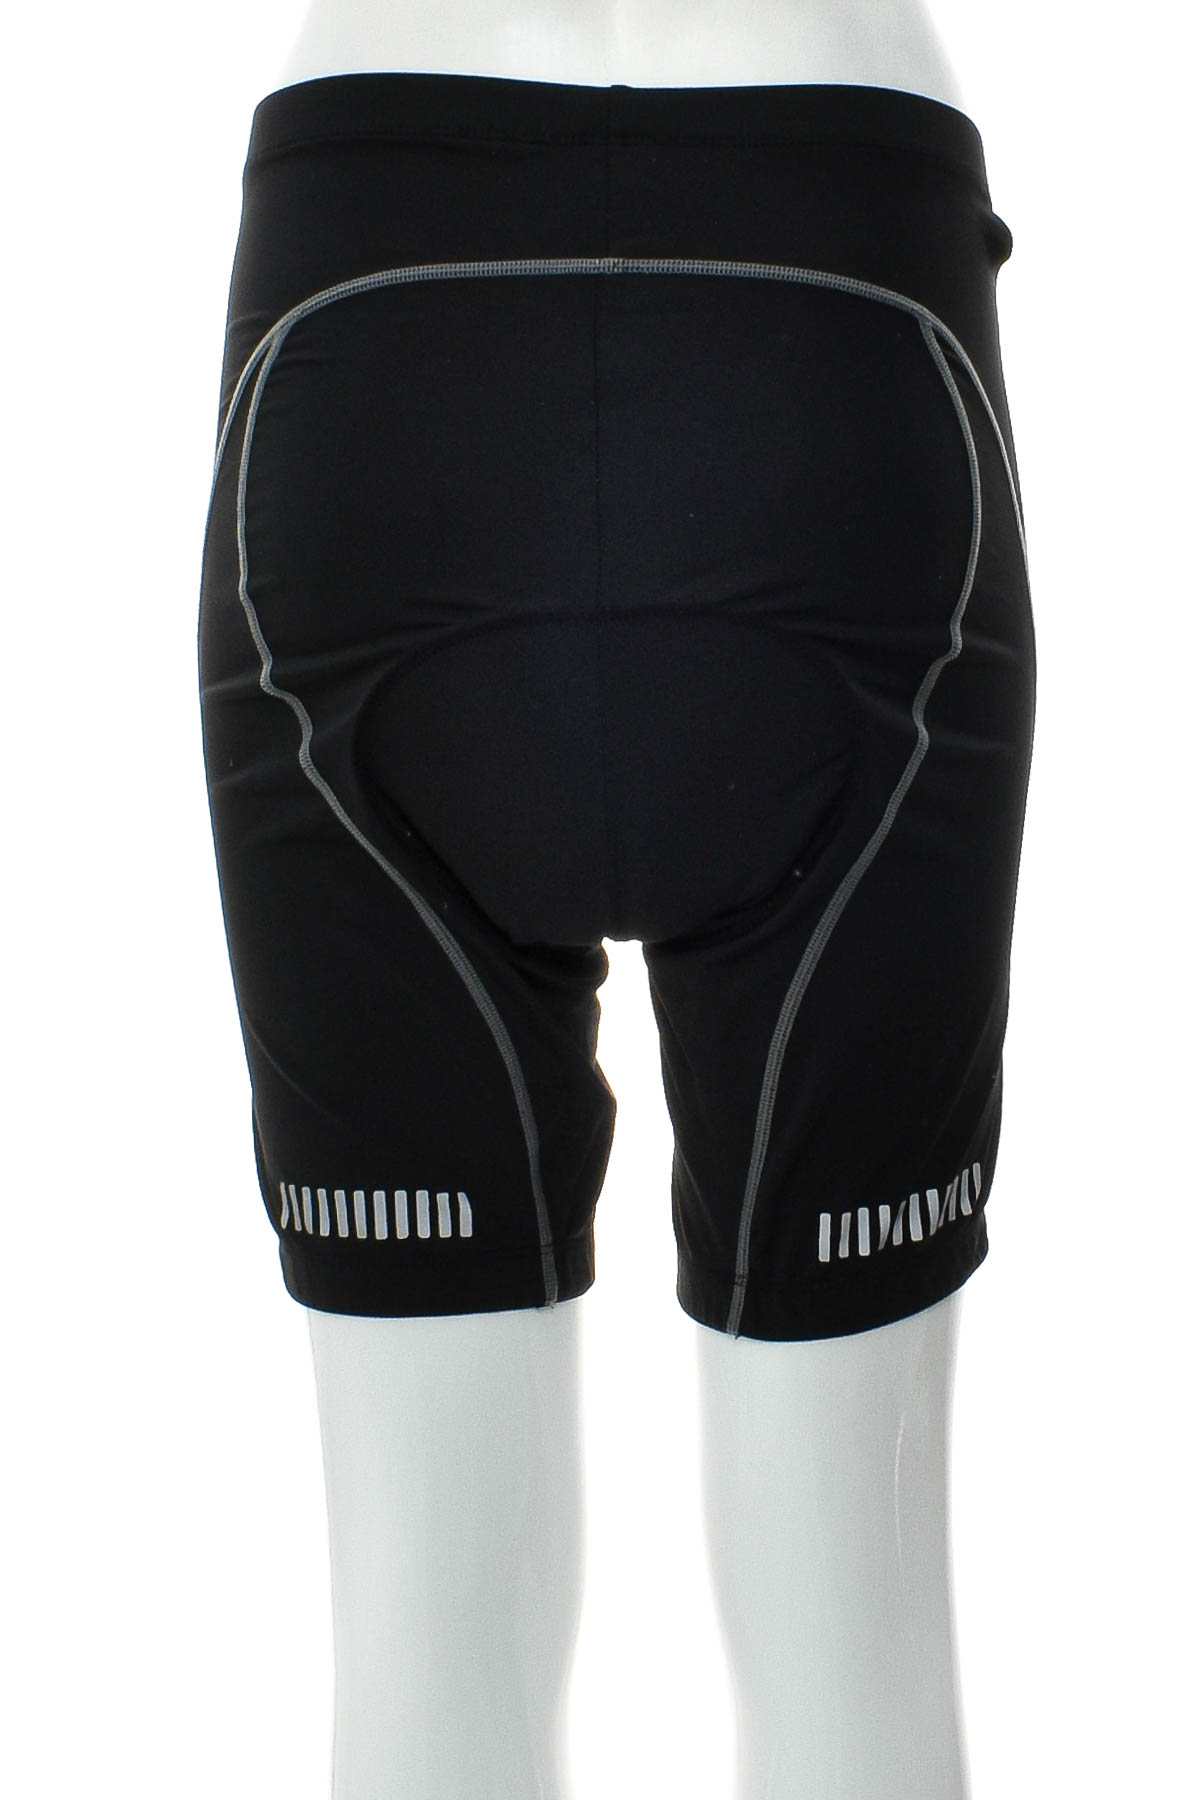 Women's cycling tights - NOOYME - 1